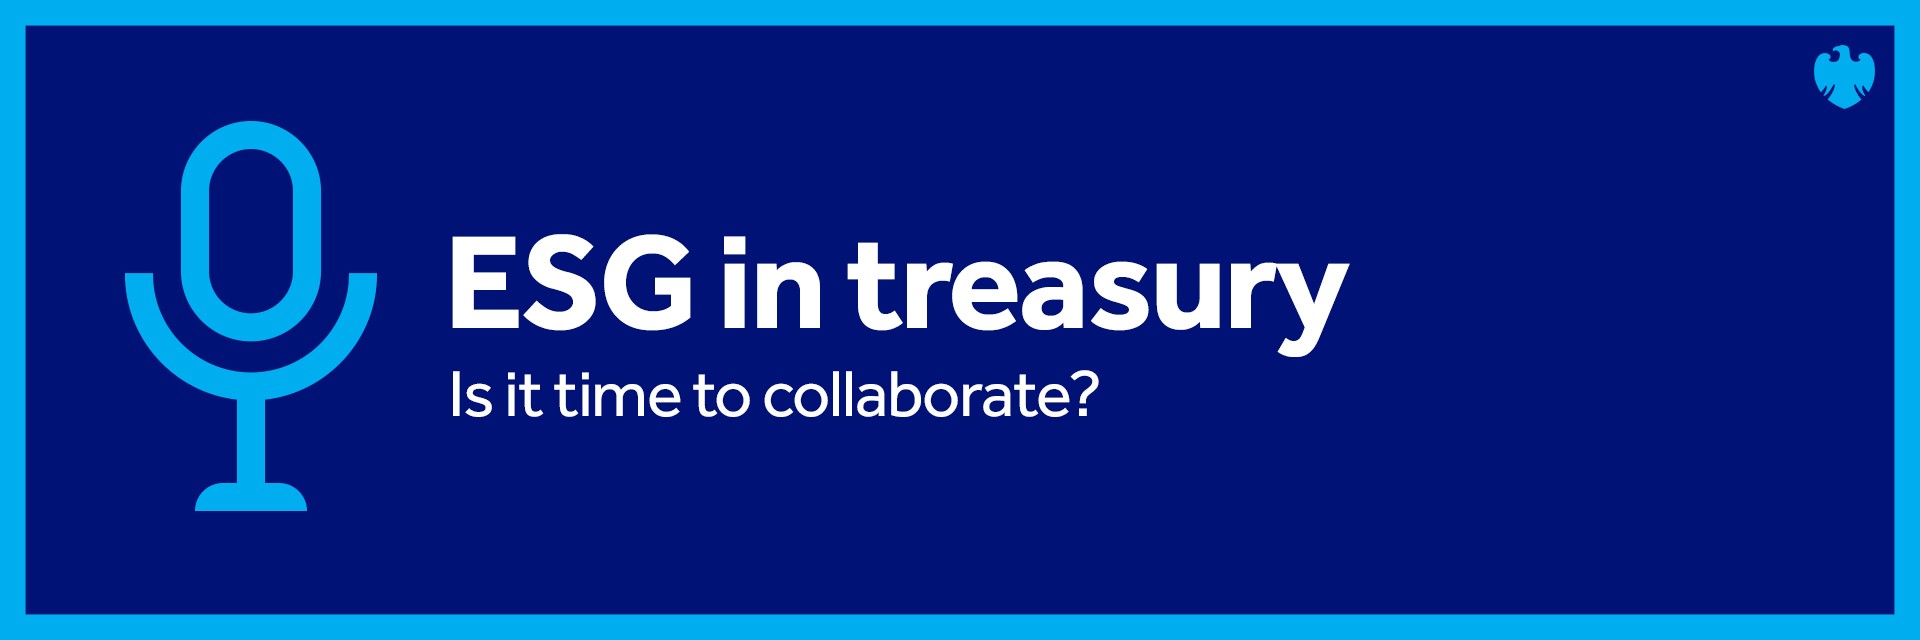 ESG in treasury. Is it time to collaborate.